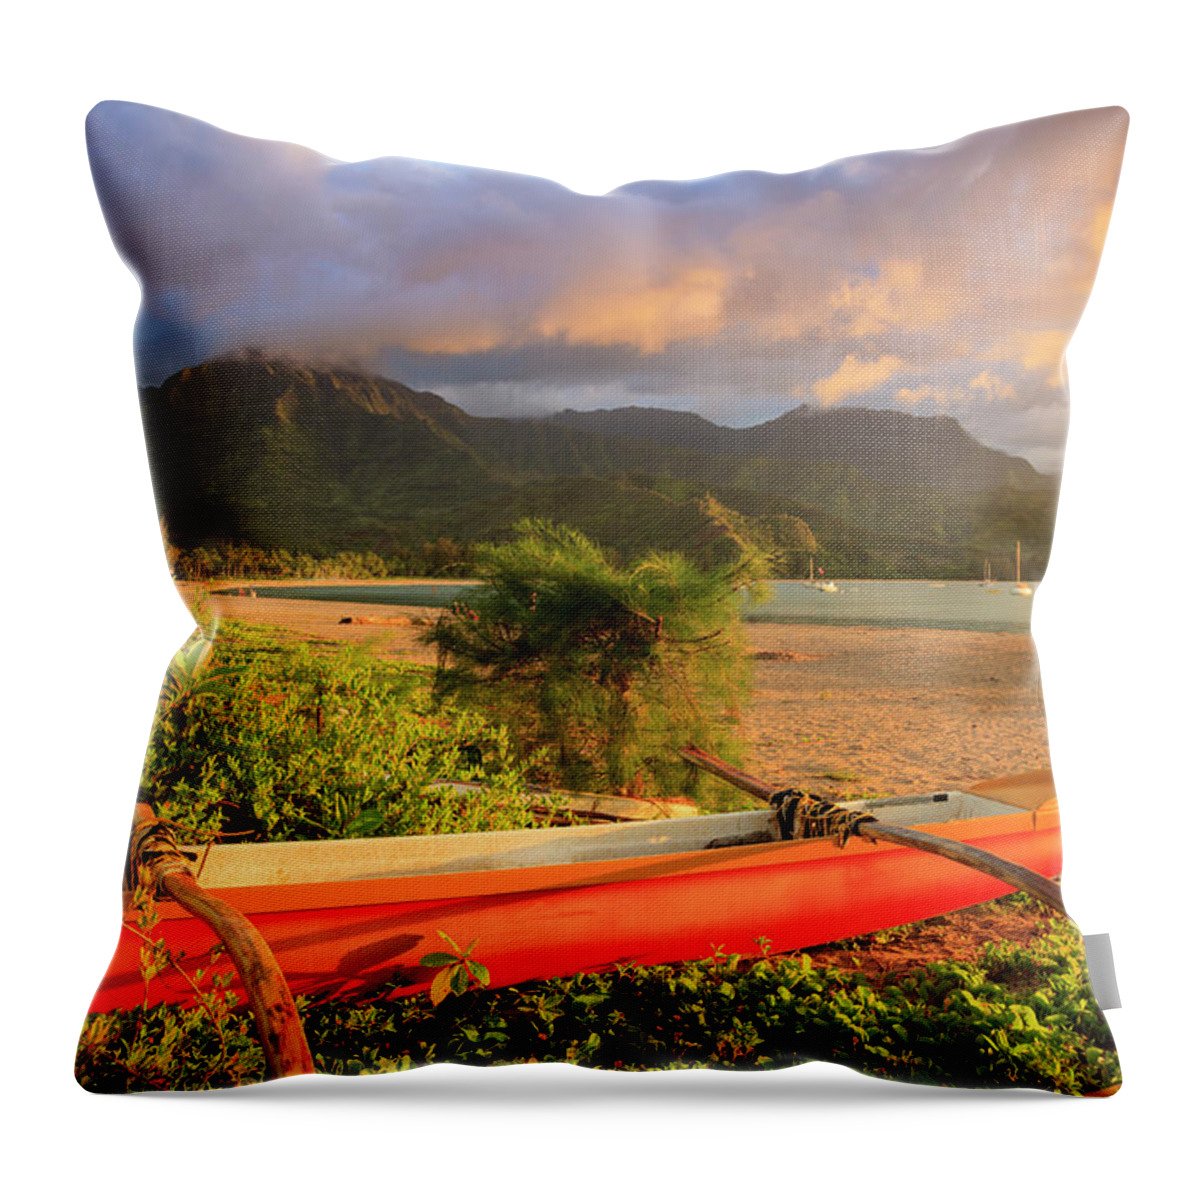 Tranquility Throw Pillow featuring the photograph Usa, Hawaii, Kauai, Hanalei Bay #1 by Michele Falzone